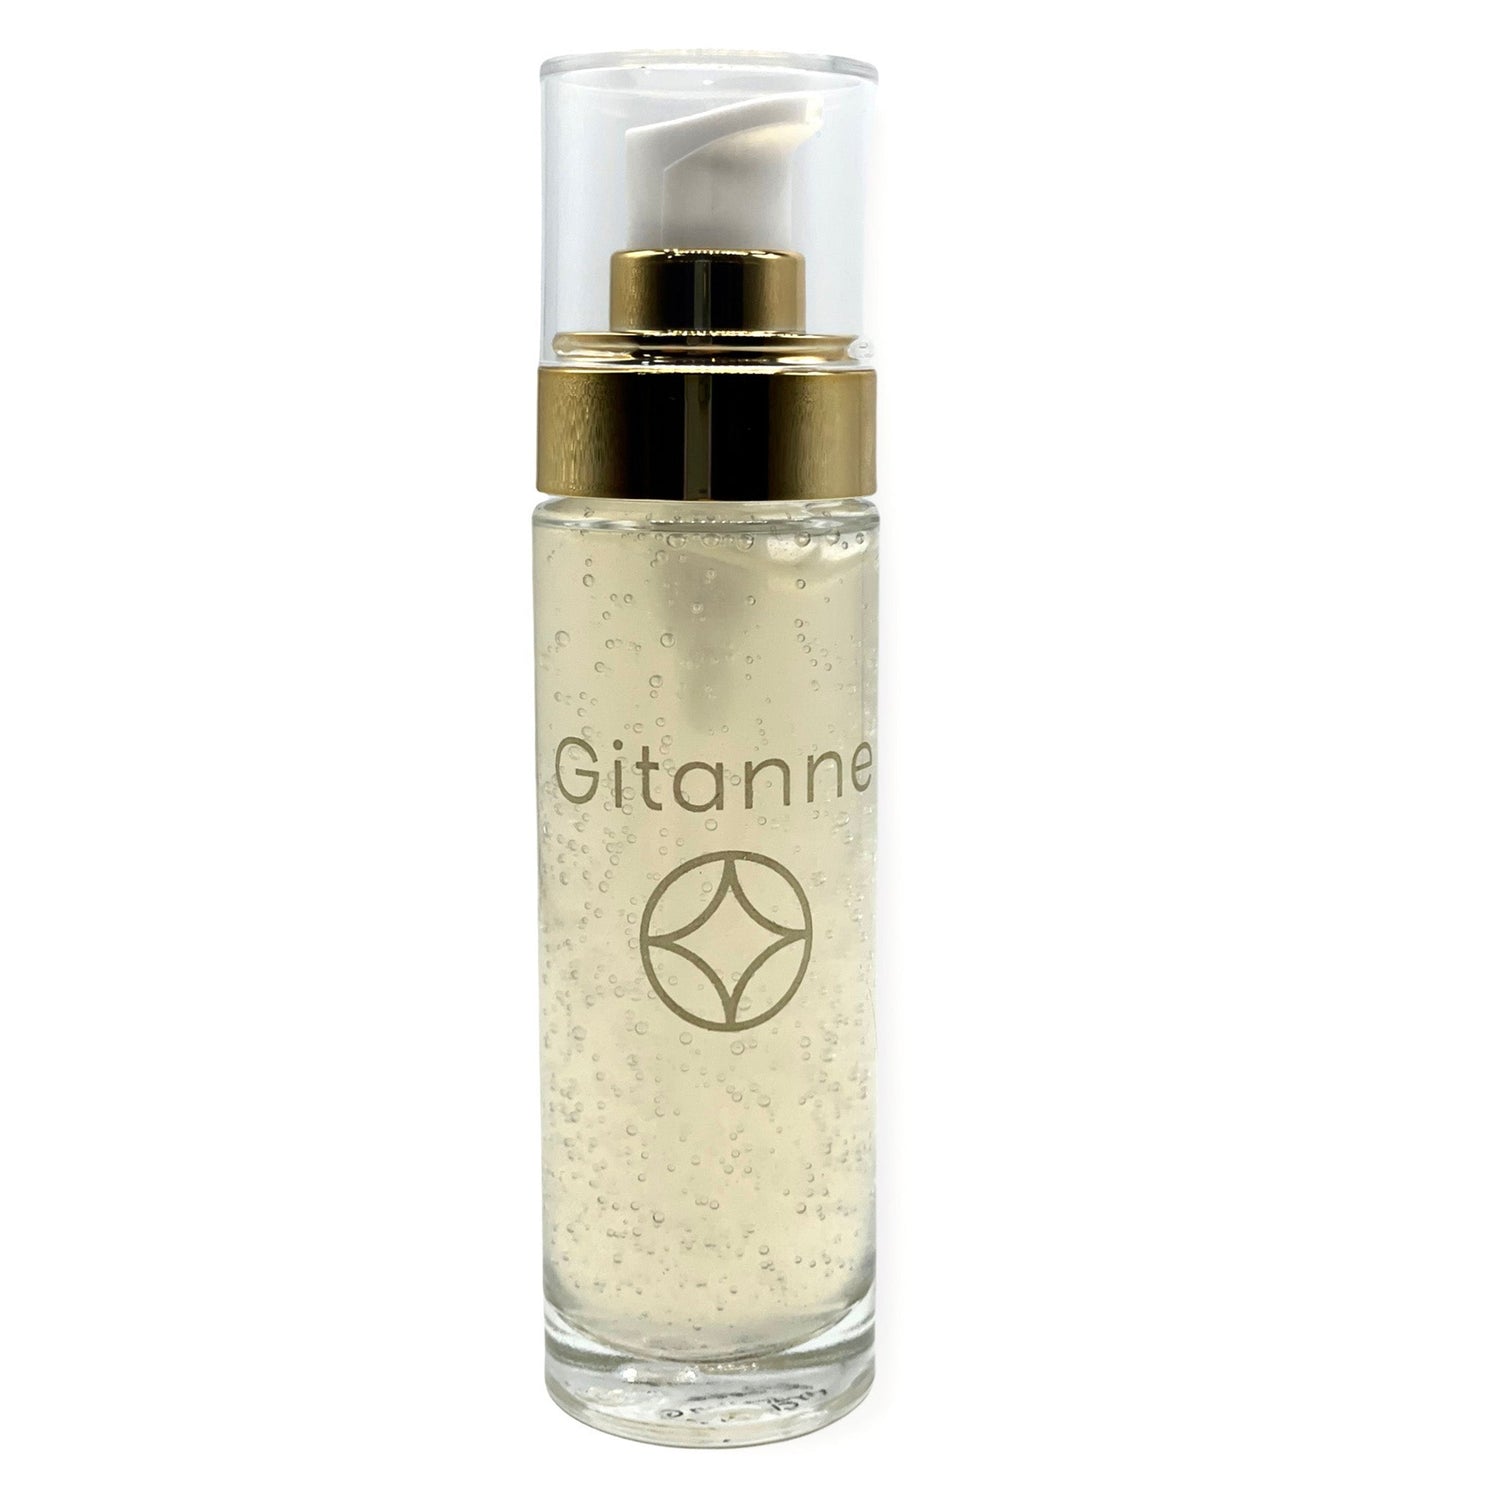 Gitanne Skincare Rivière Exfoliating Gel Facial Cleanser gently removes dead skin cells for a vibrant, smooth texture